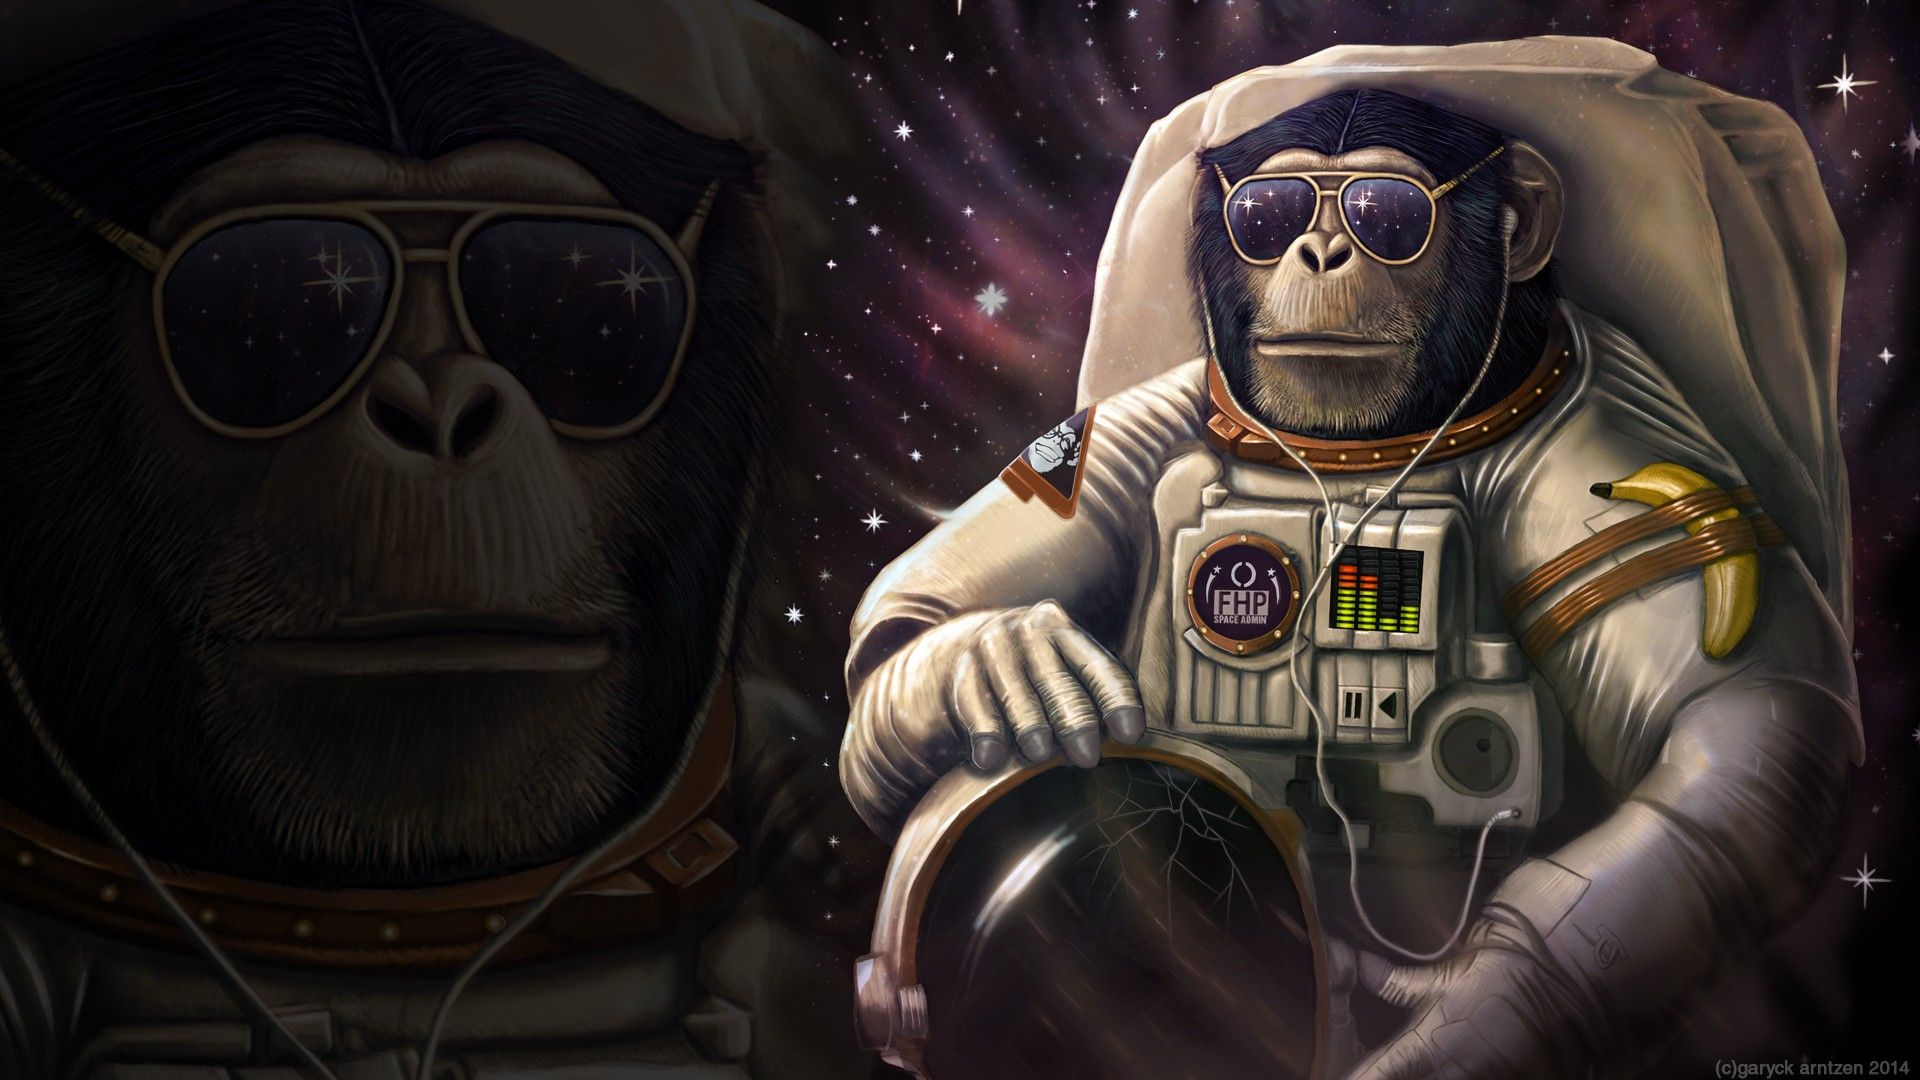 cool monkey wallpaper,astronaut,animation,space,adventure game,fictional character